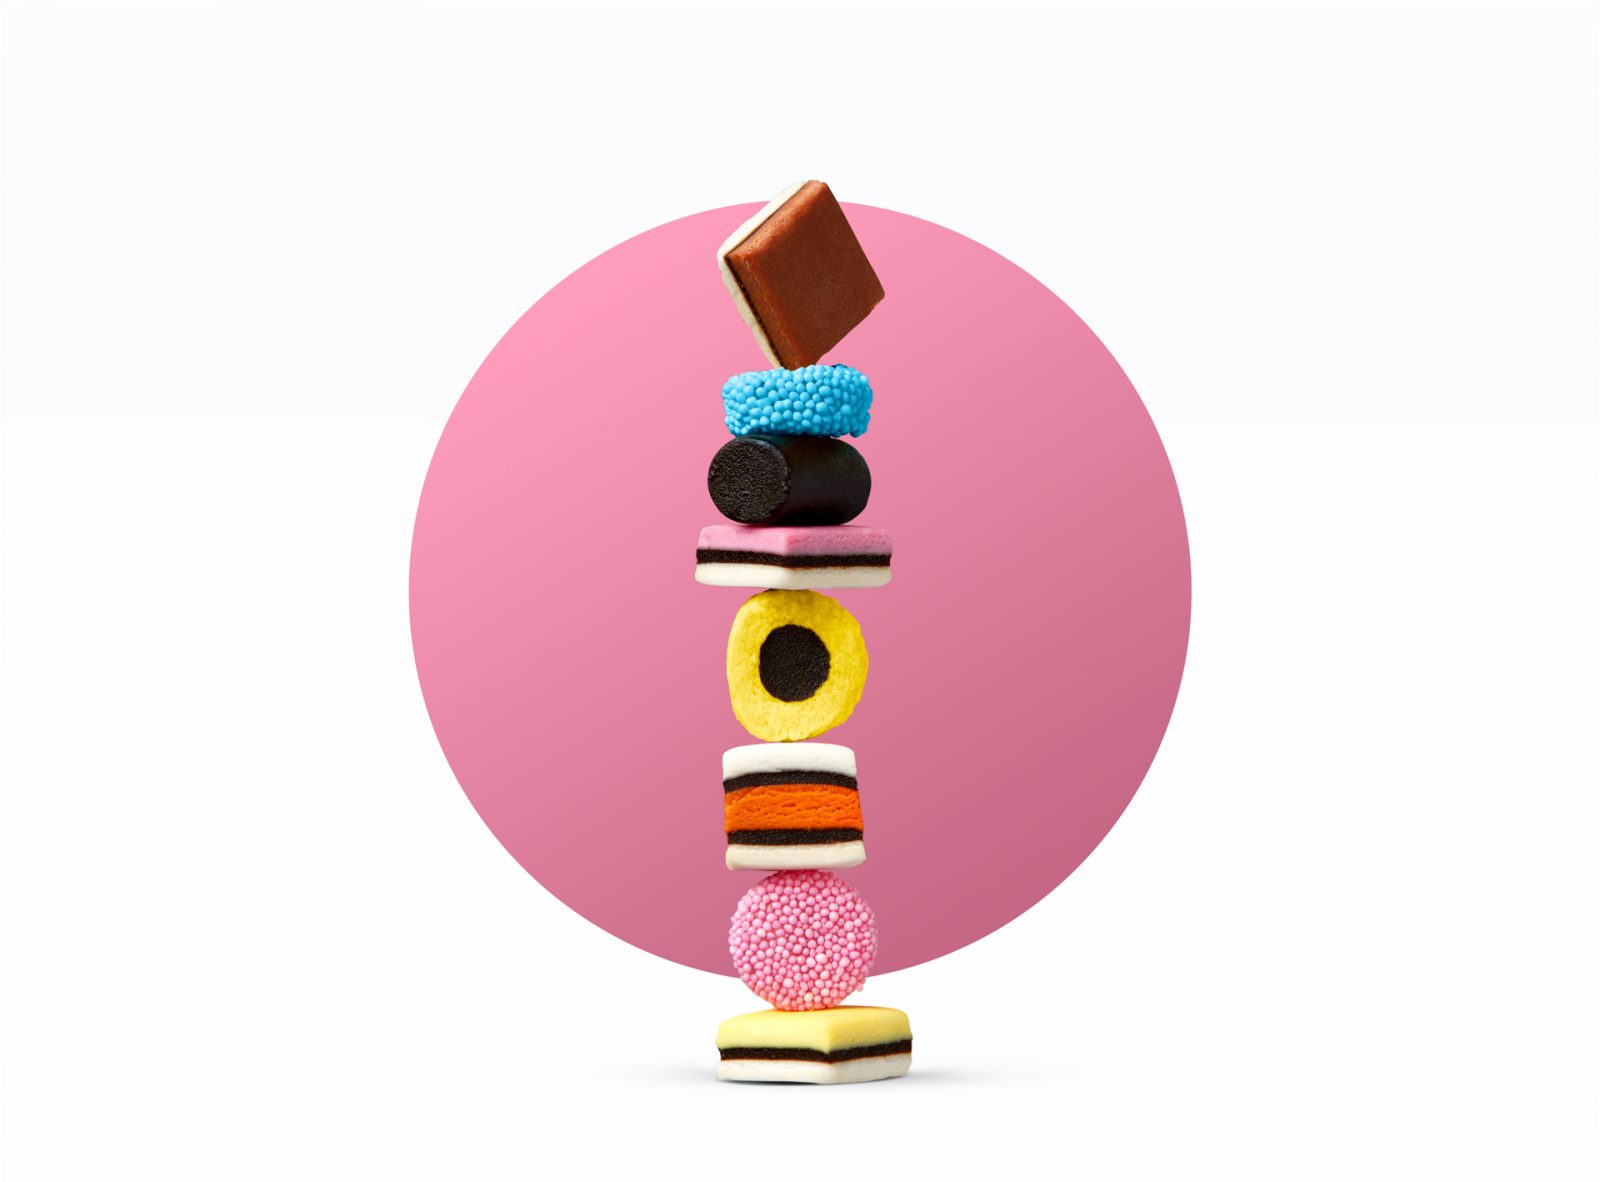 Floris Holtland - packaging photography - liquorice - colourful mix